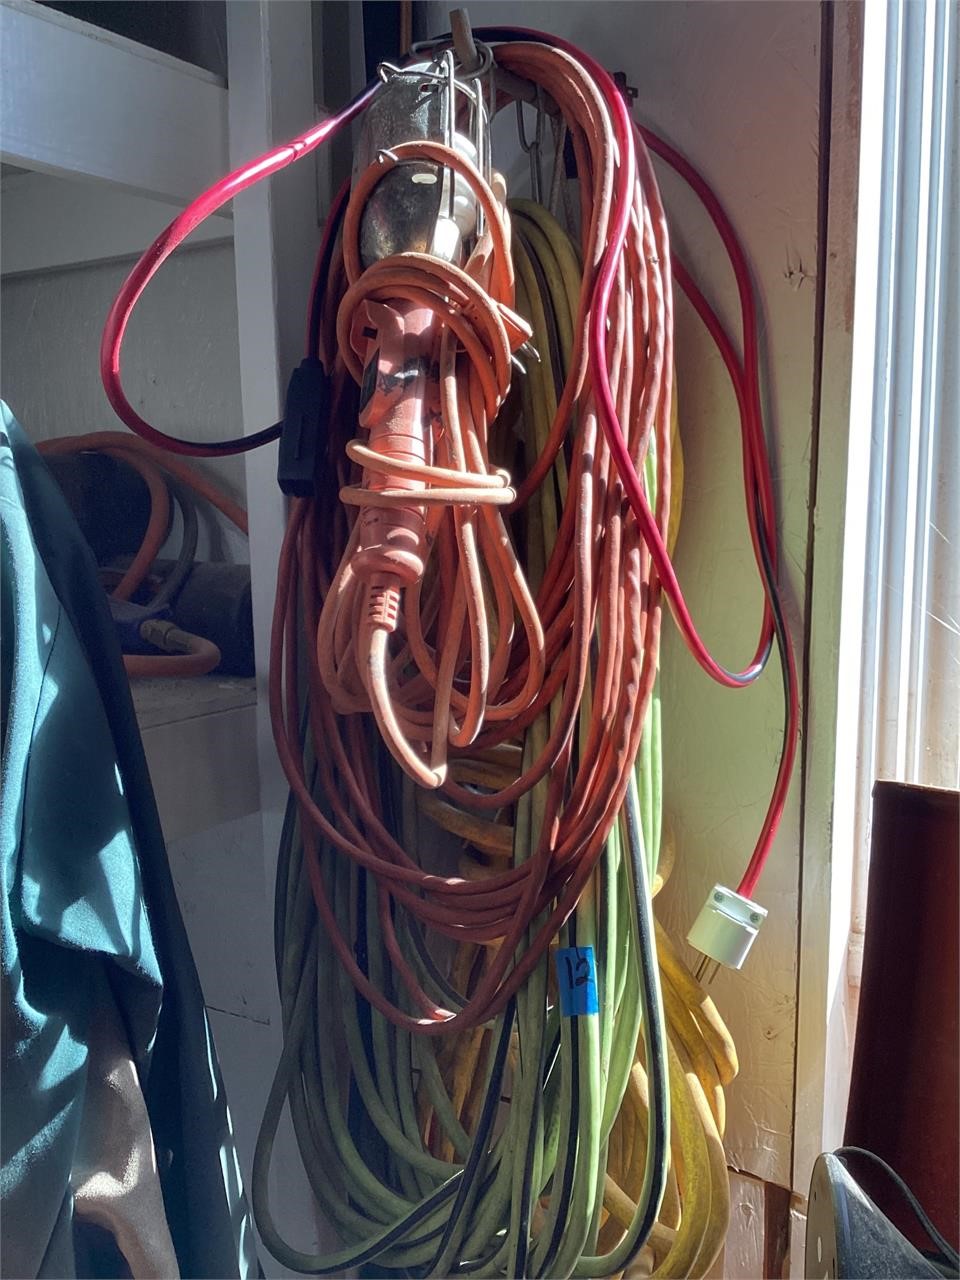 Electric cords lot